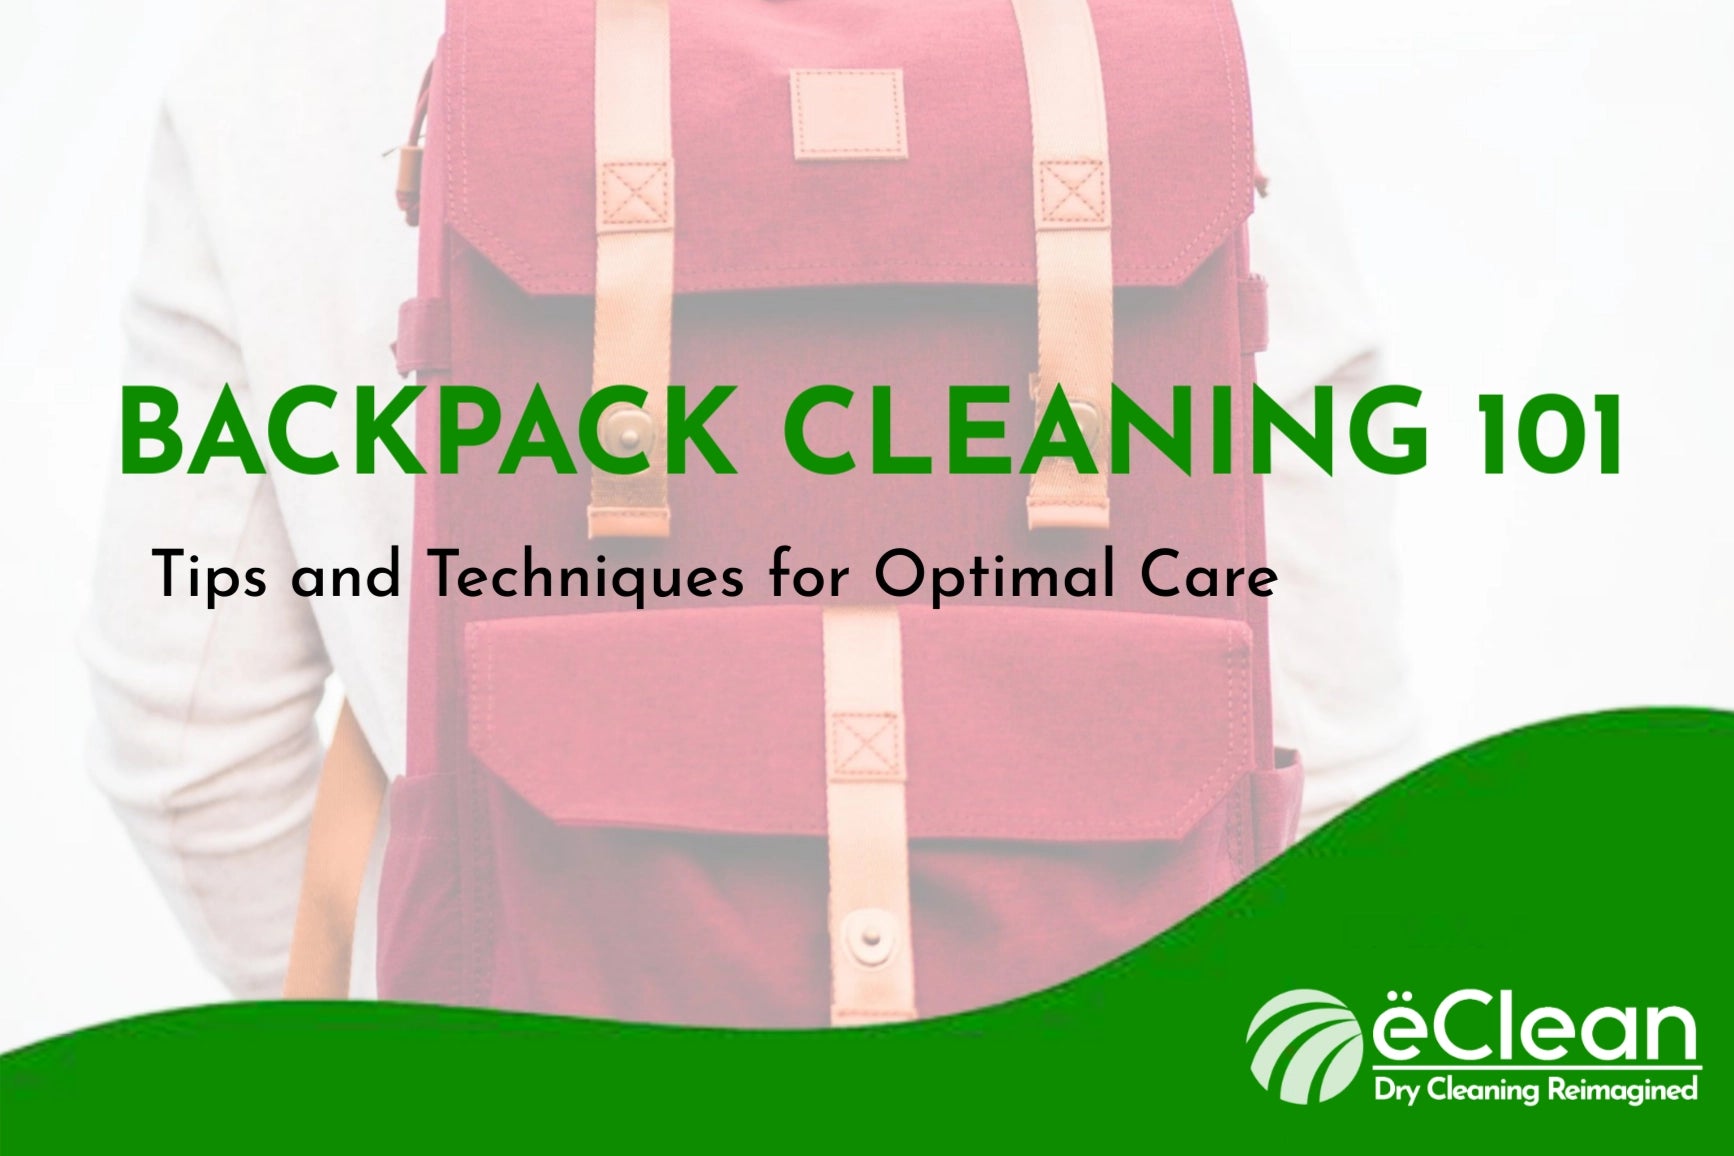 Backpack Cleaning 101: Tips and Techniques for Optimal Care